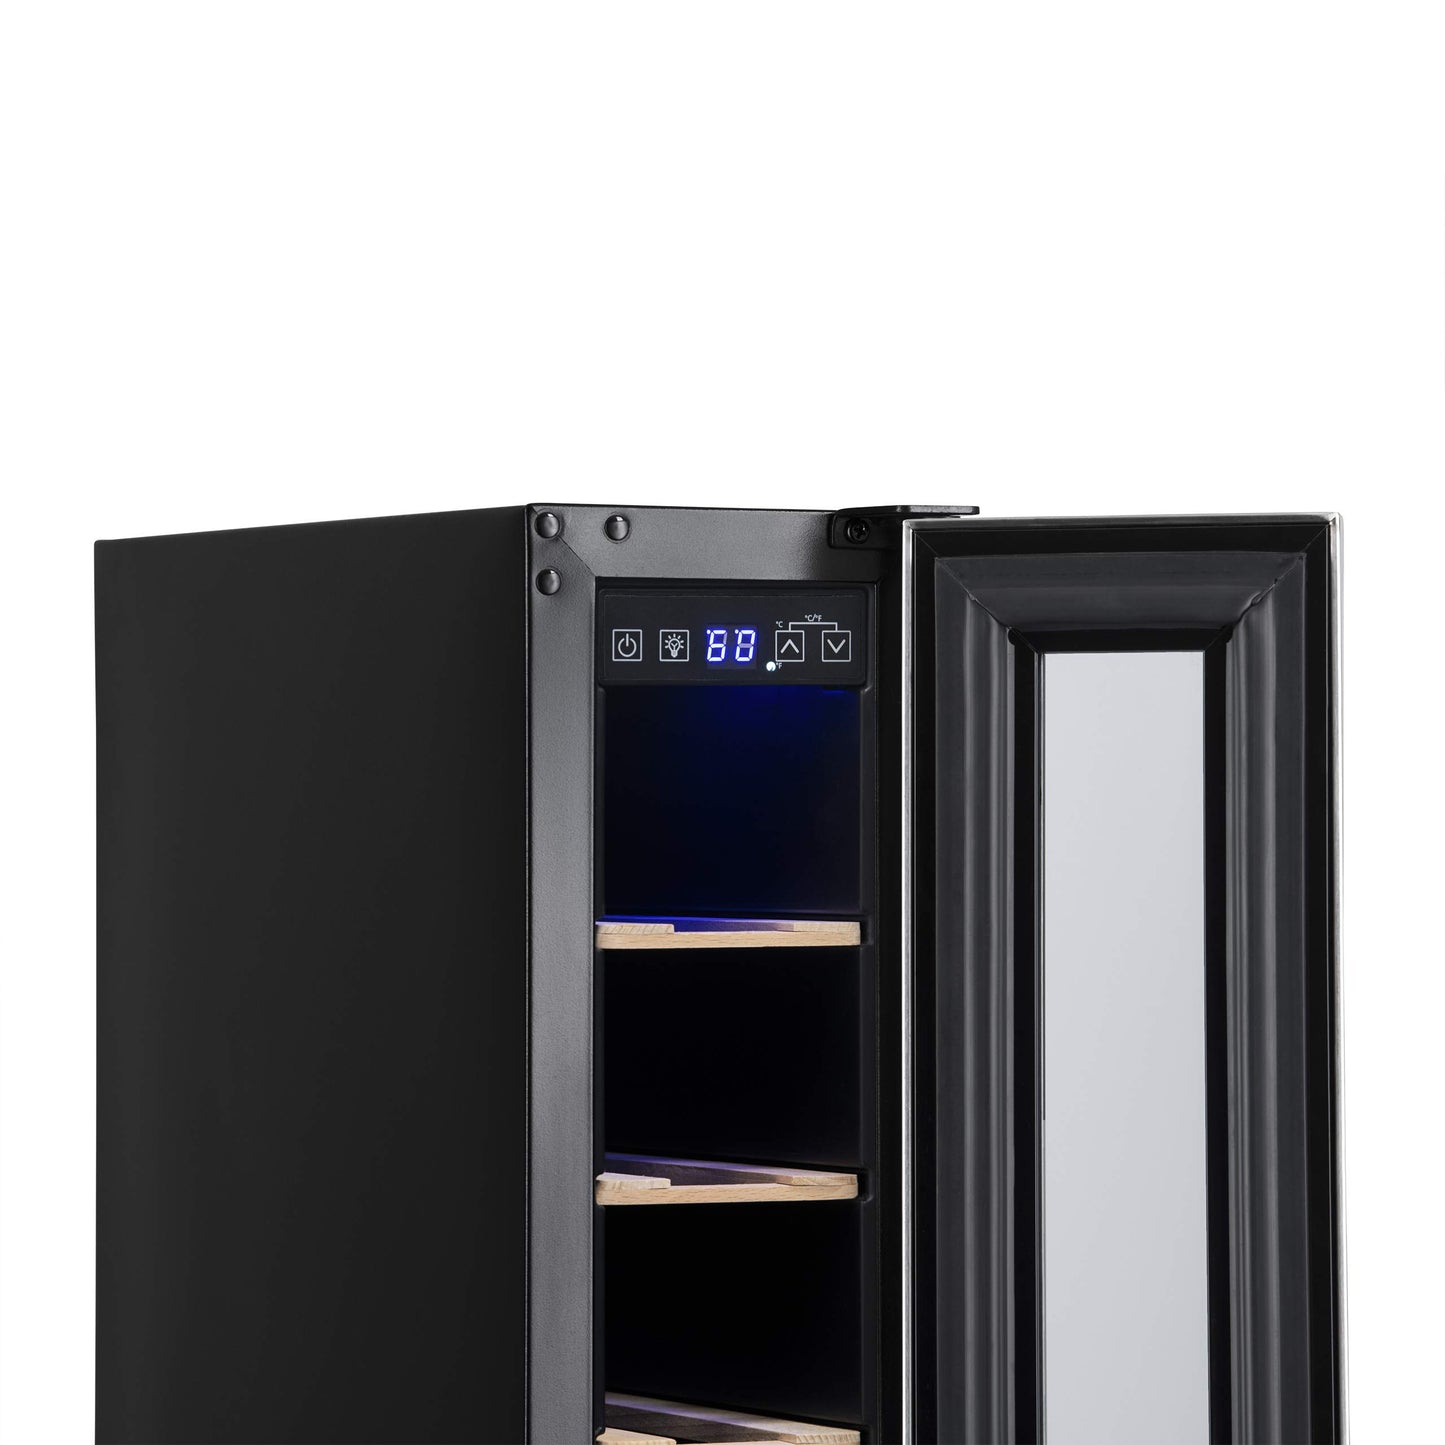 NewAir 6" Built-in or Freestanding 7 Bottle Wine Fridge, Bar Cabinet Mini Wine Cooler with Beech Wood Shelves, Stainless Steel Wine Cellar for Red, White, and Sparkling Wine